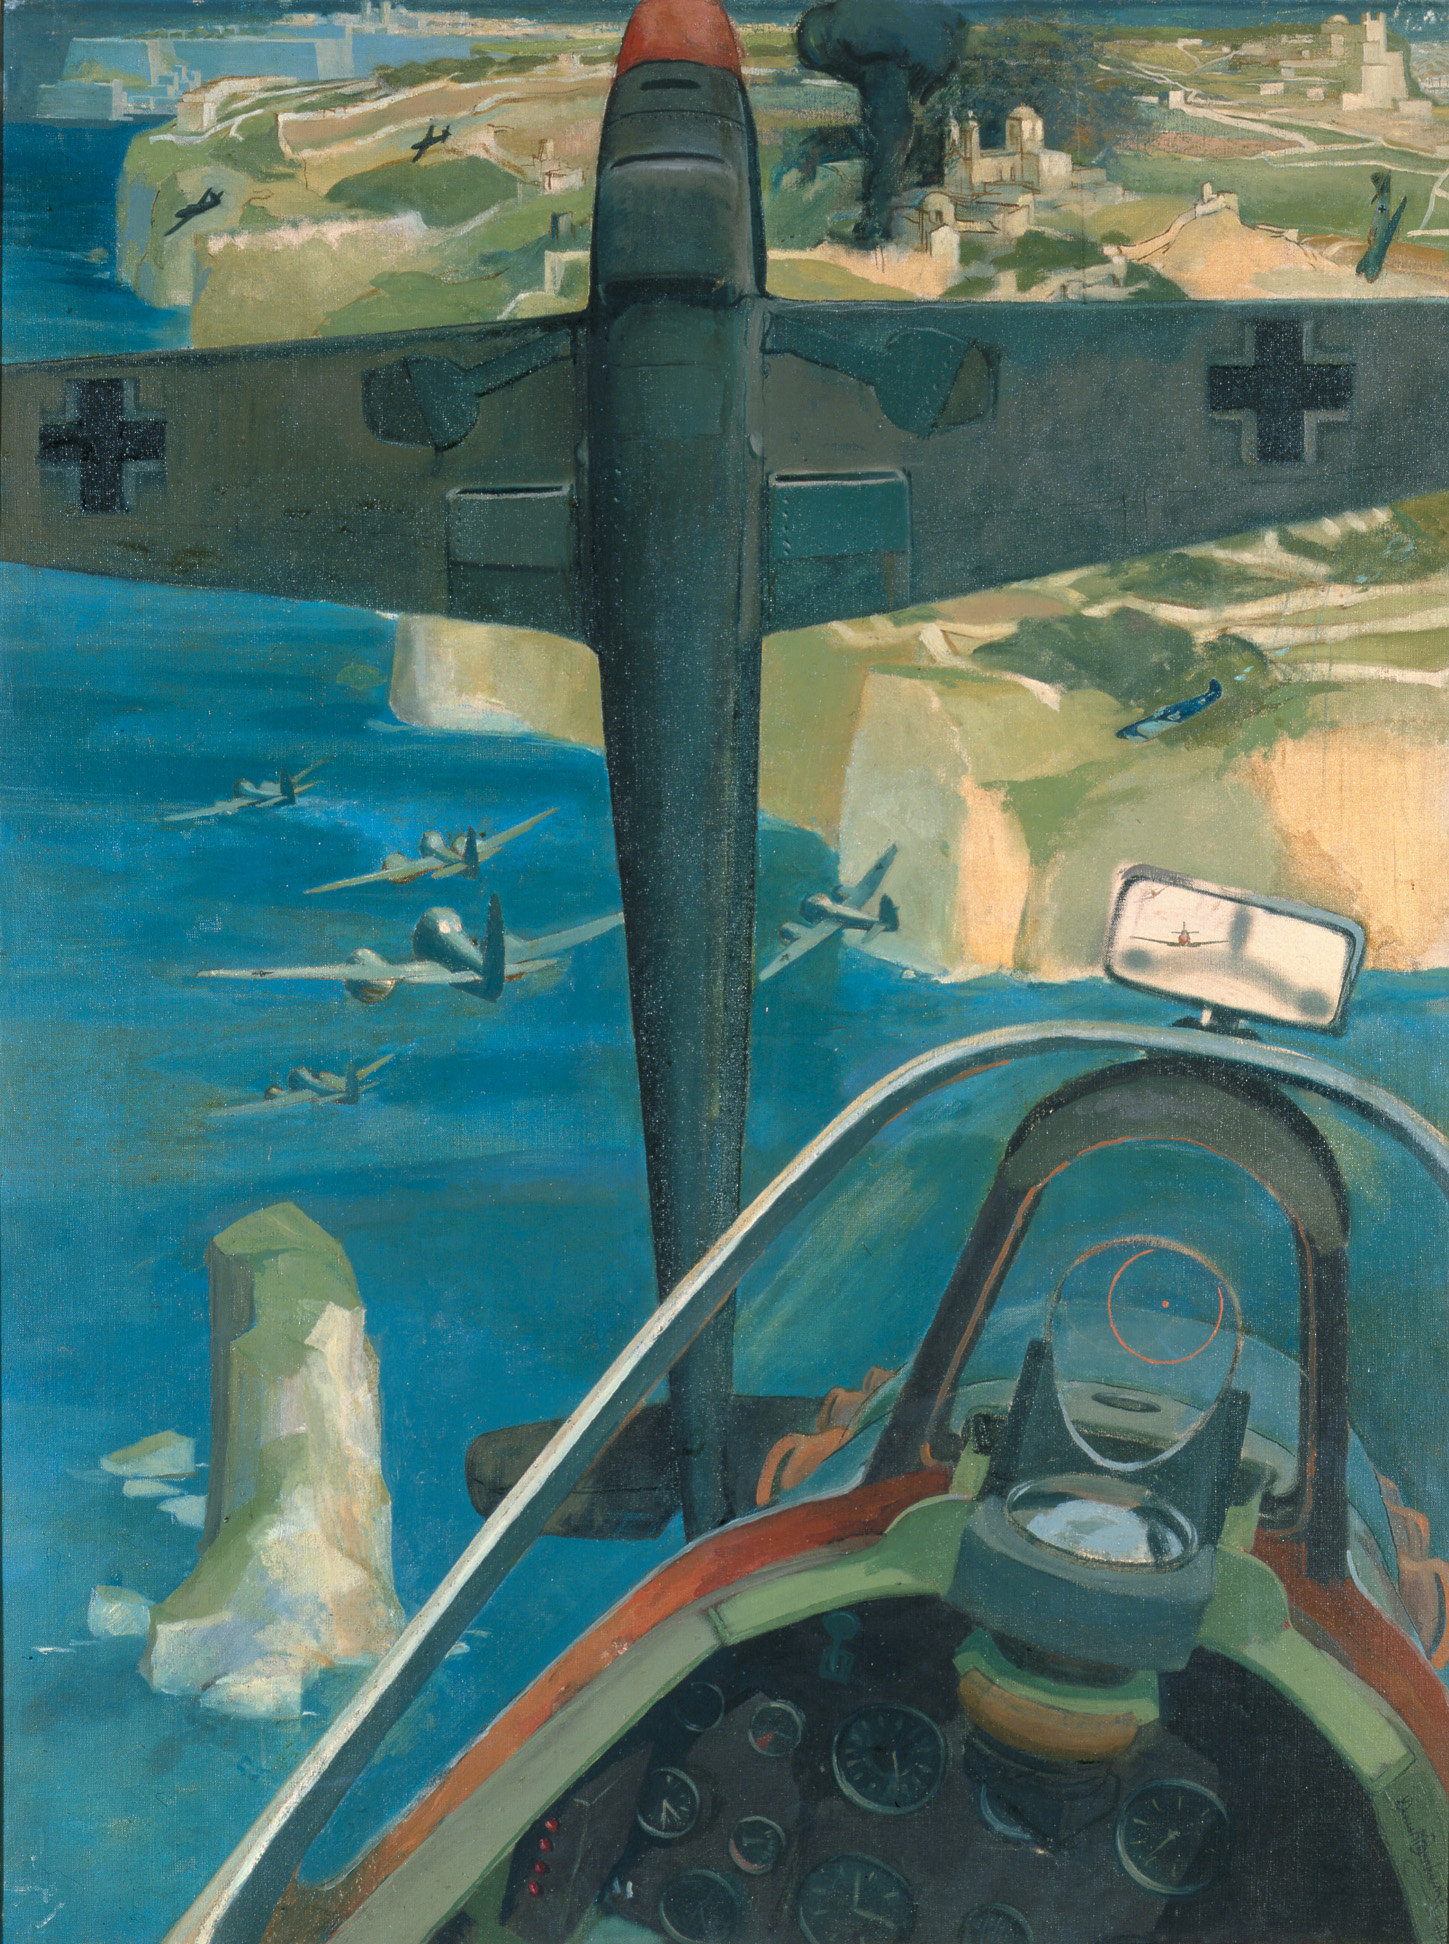 This painting by Denis A. Barham titled Battle Over Malta reveals a Spitfire pilot’s view of air combat.